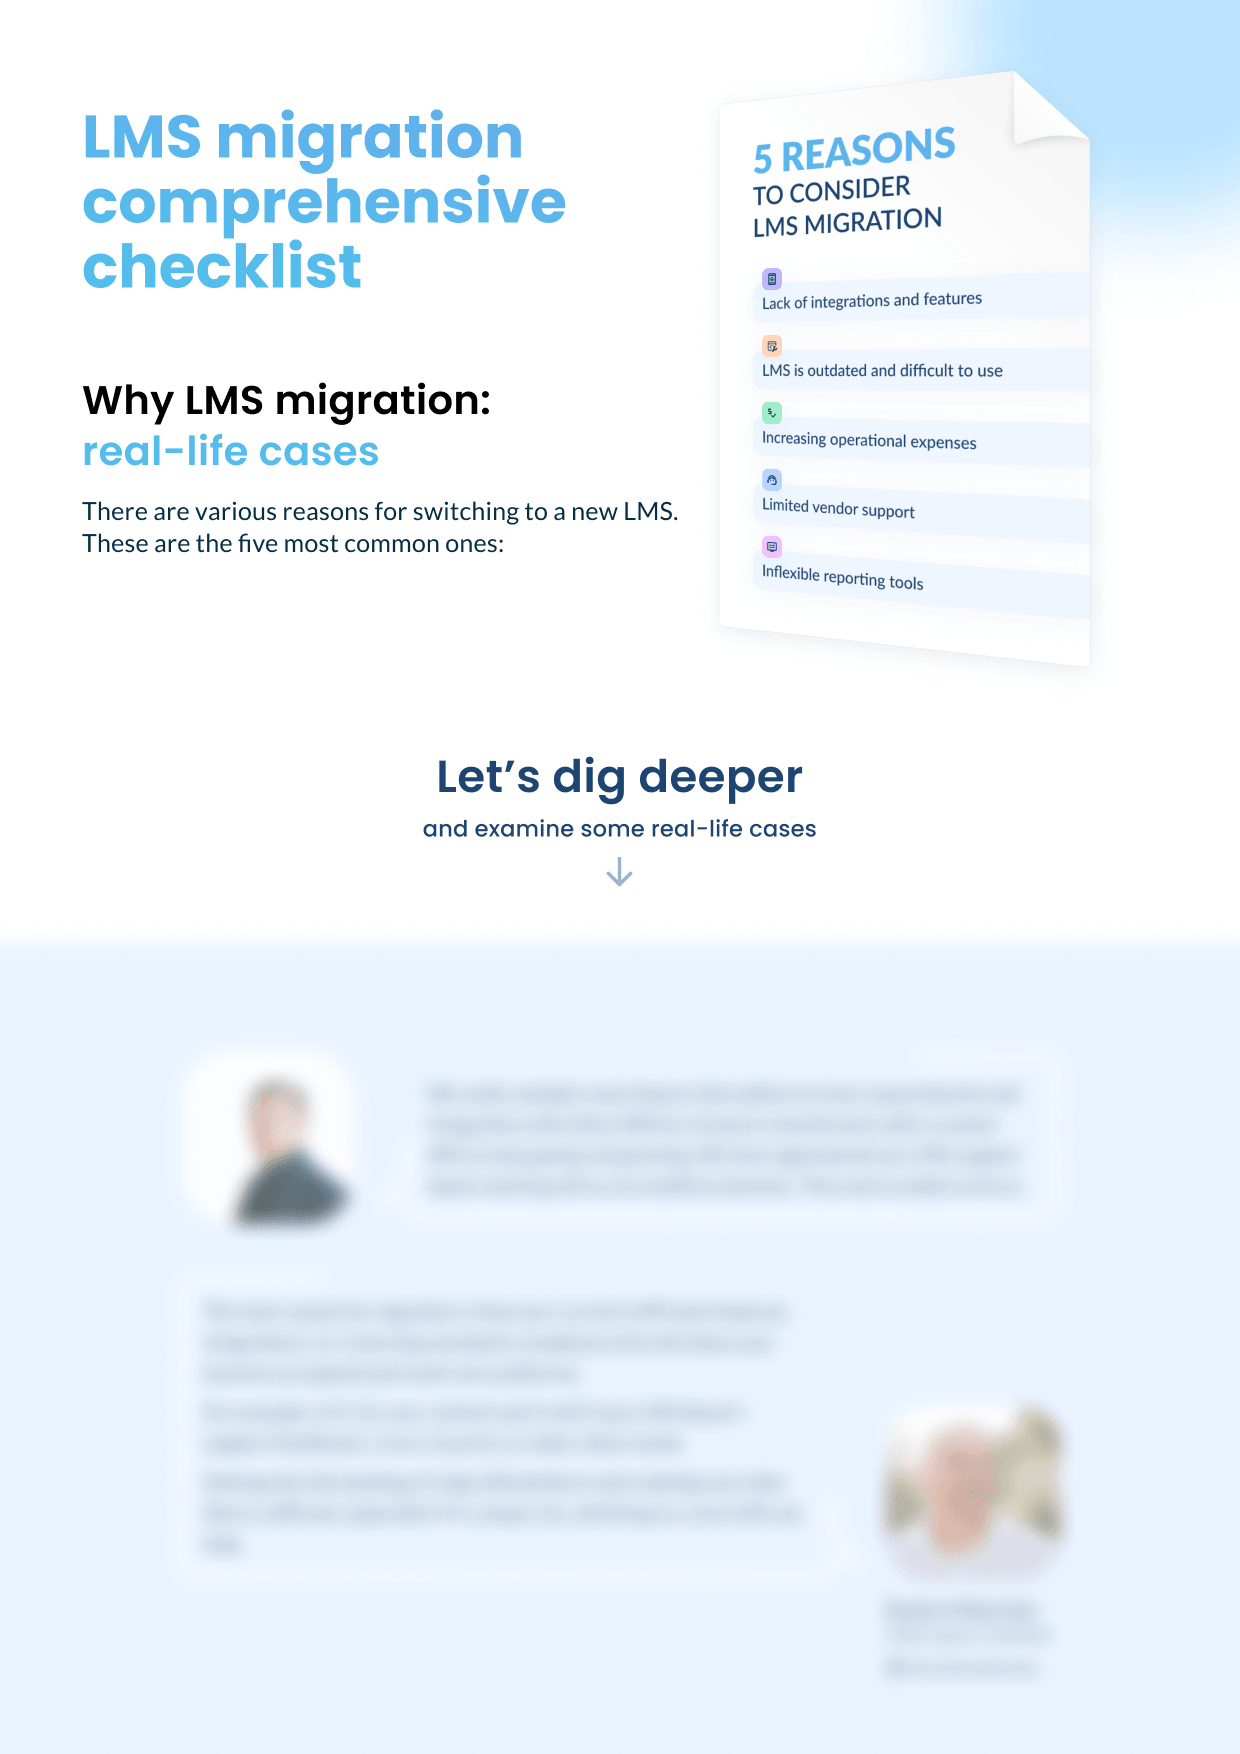 Reap the benefits of LMS migration